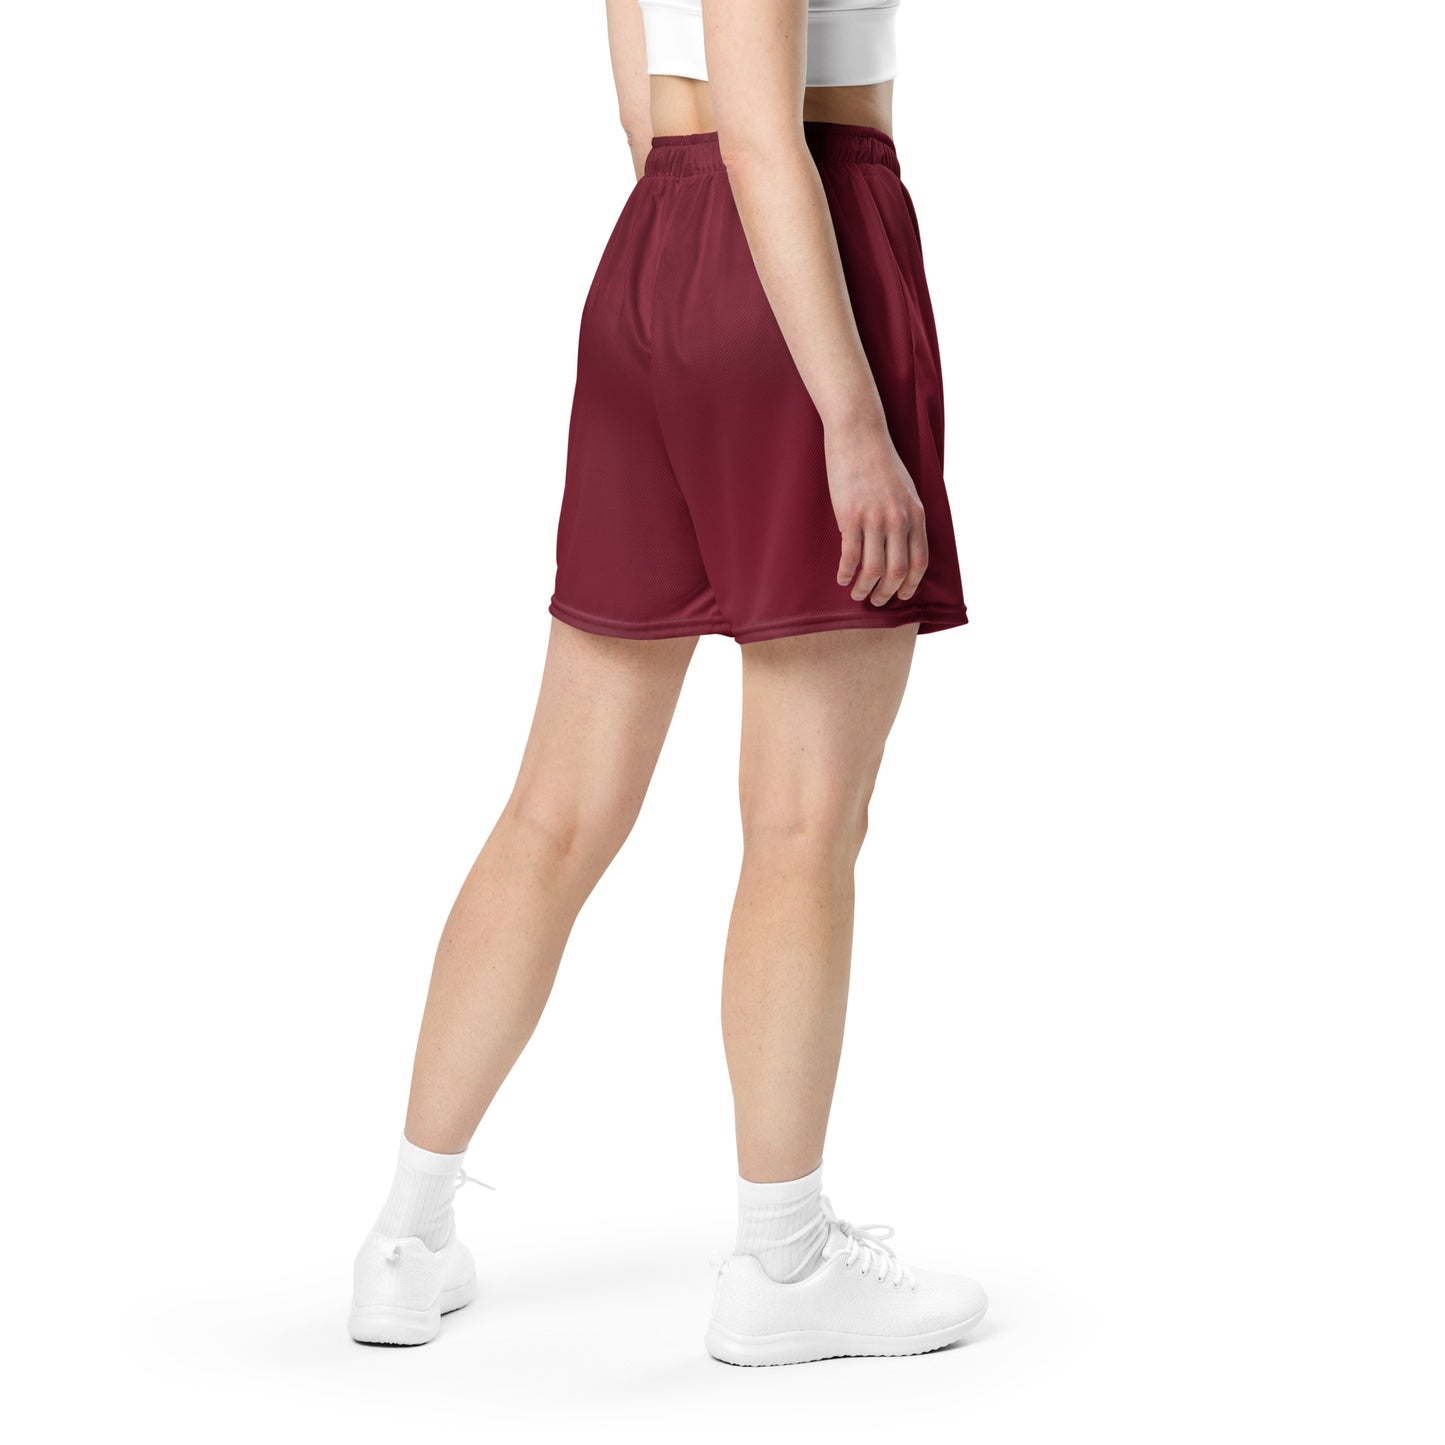 Aire Shorts - Burgundy